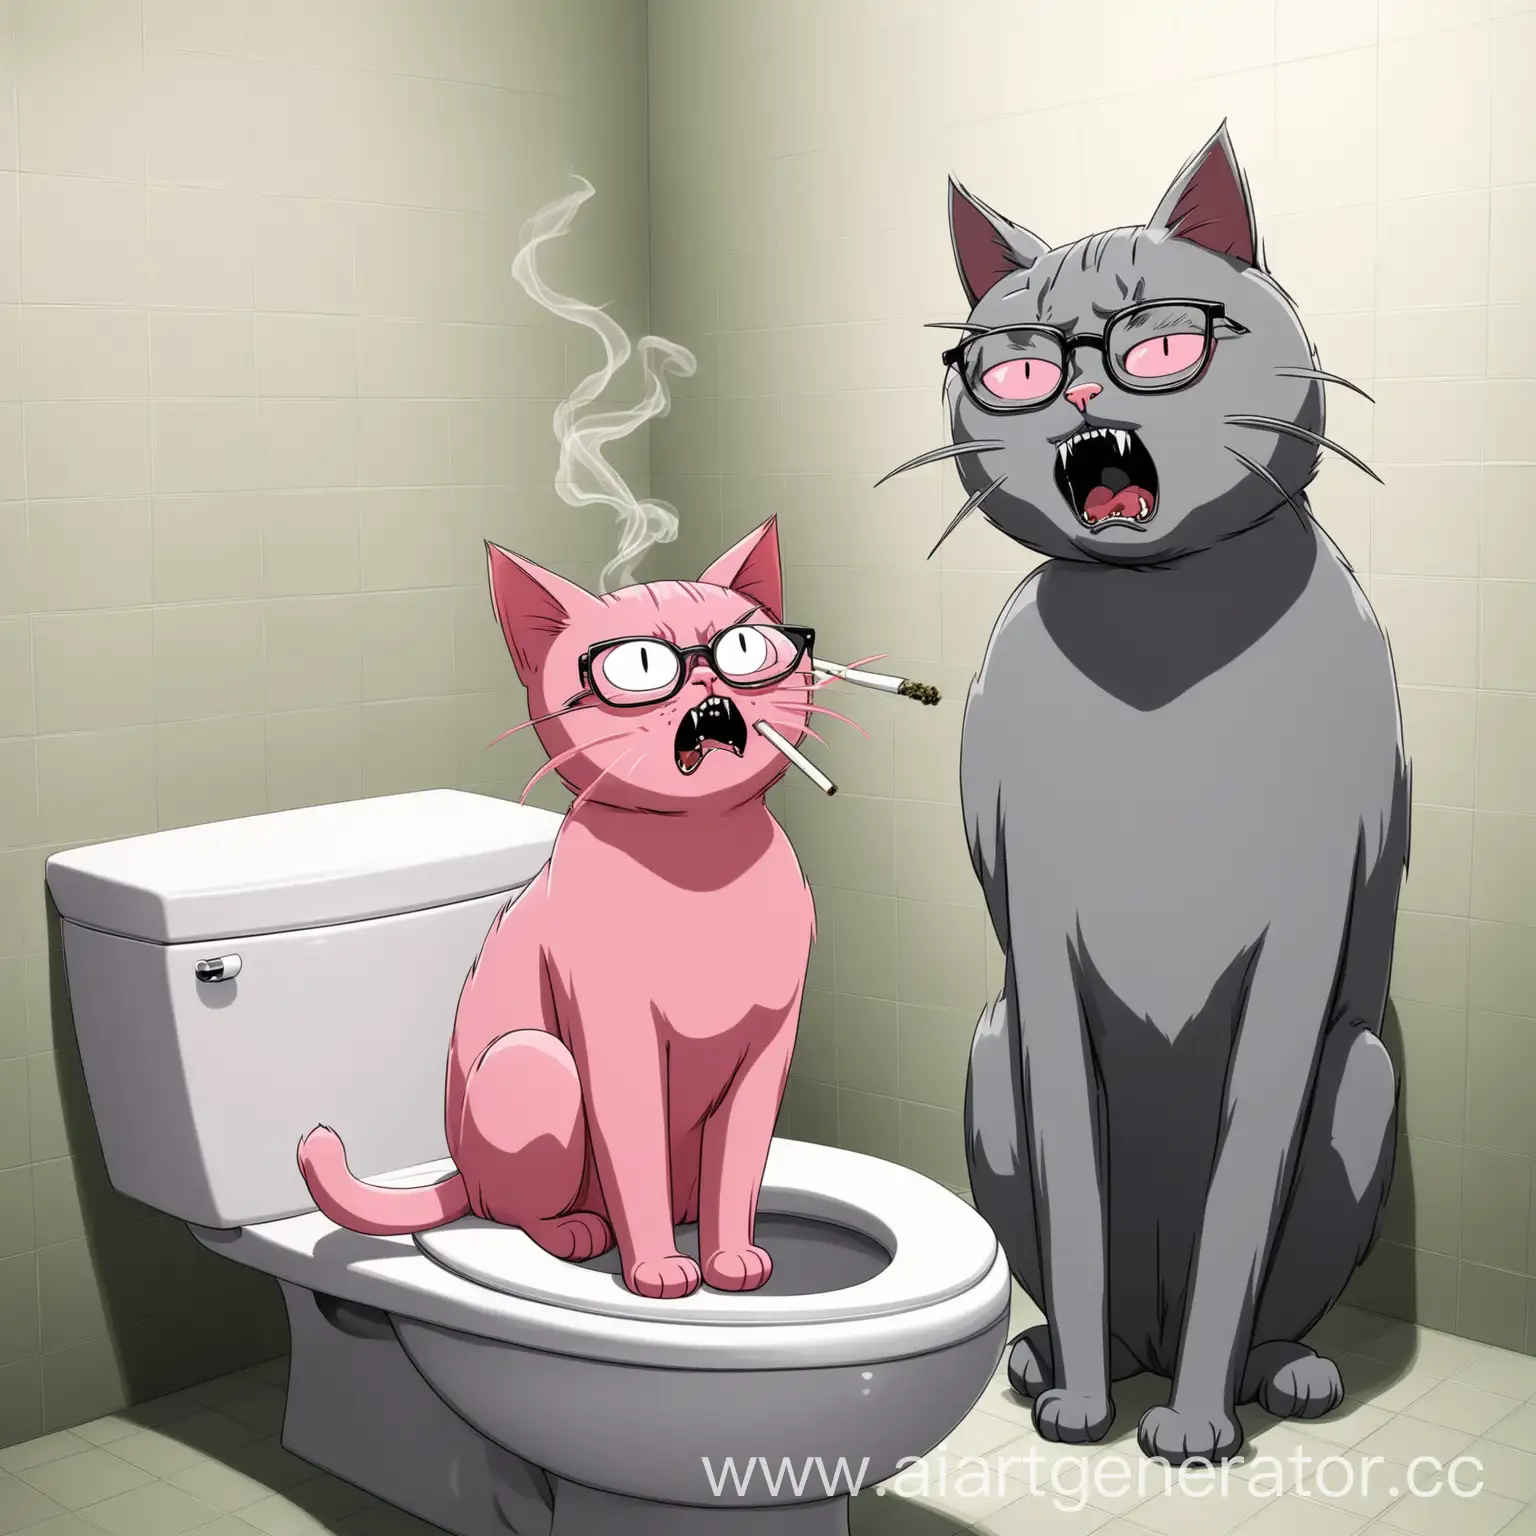 Cats-Smoking-Weed-Pink-Cat-on-Toilet-Gray-Cat-with-Glasses